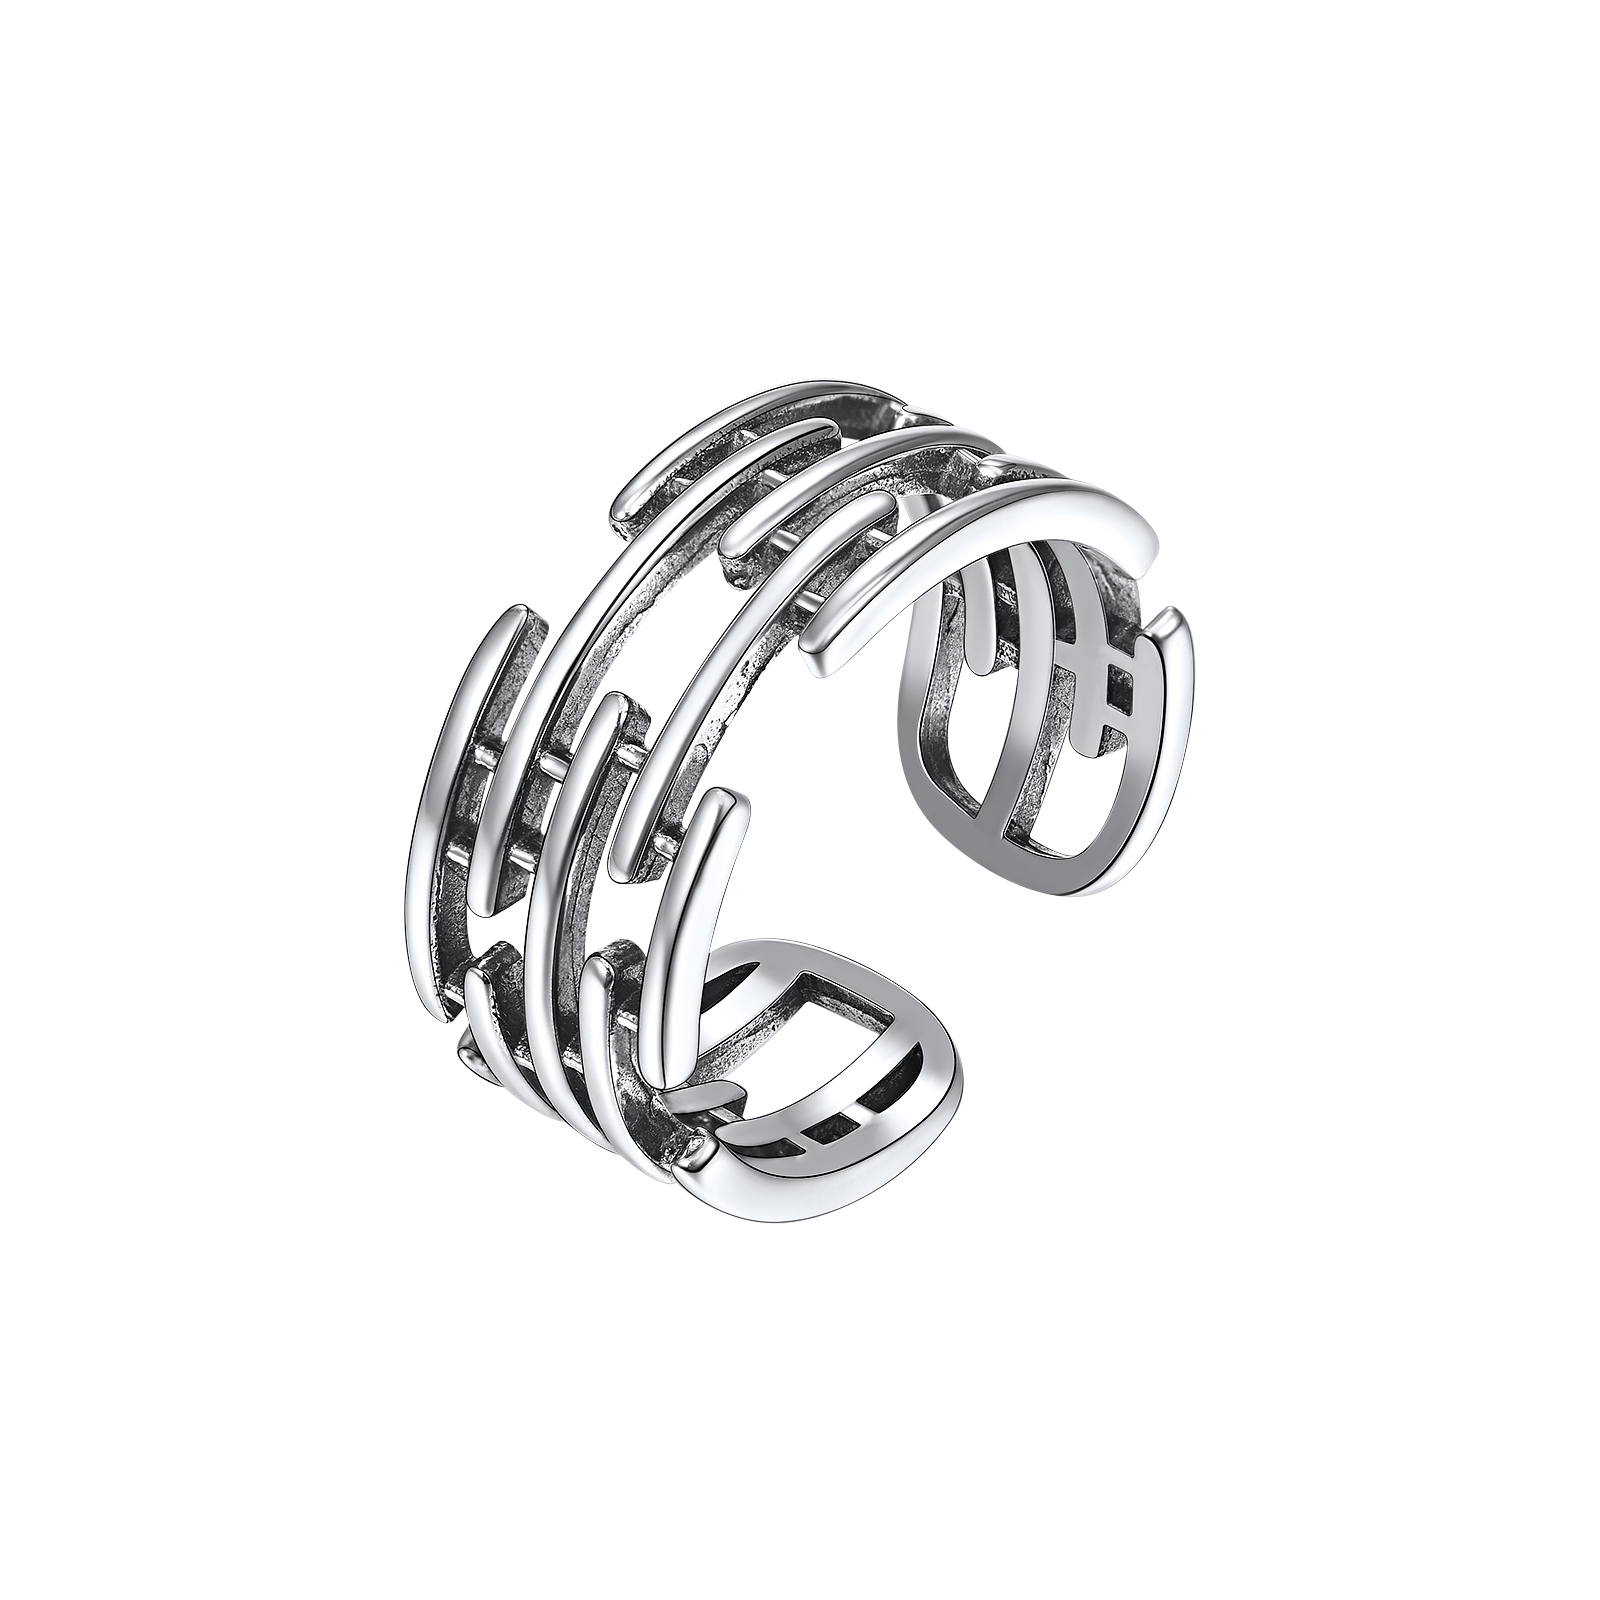 ChicSilver 925 Sterling Silver Minimalist Wide Band Ring For Women